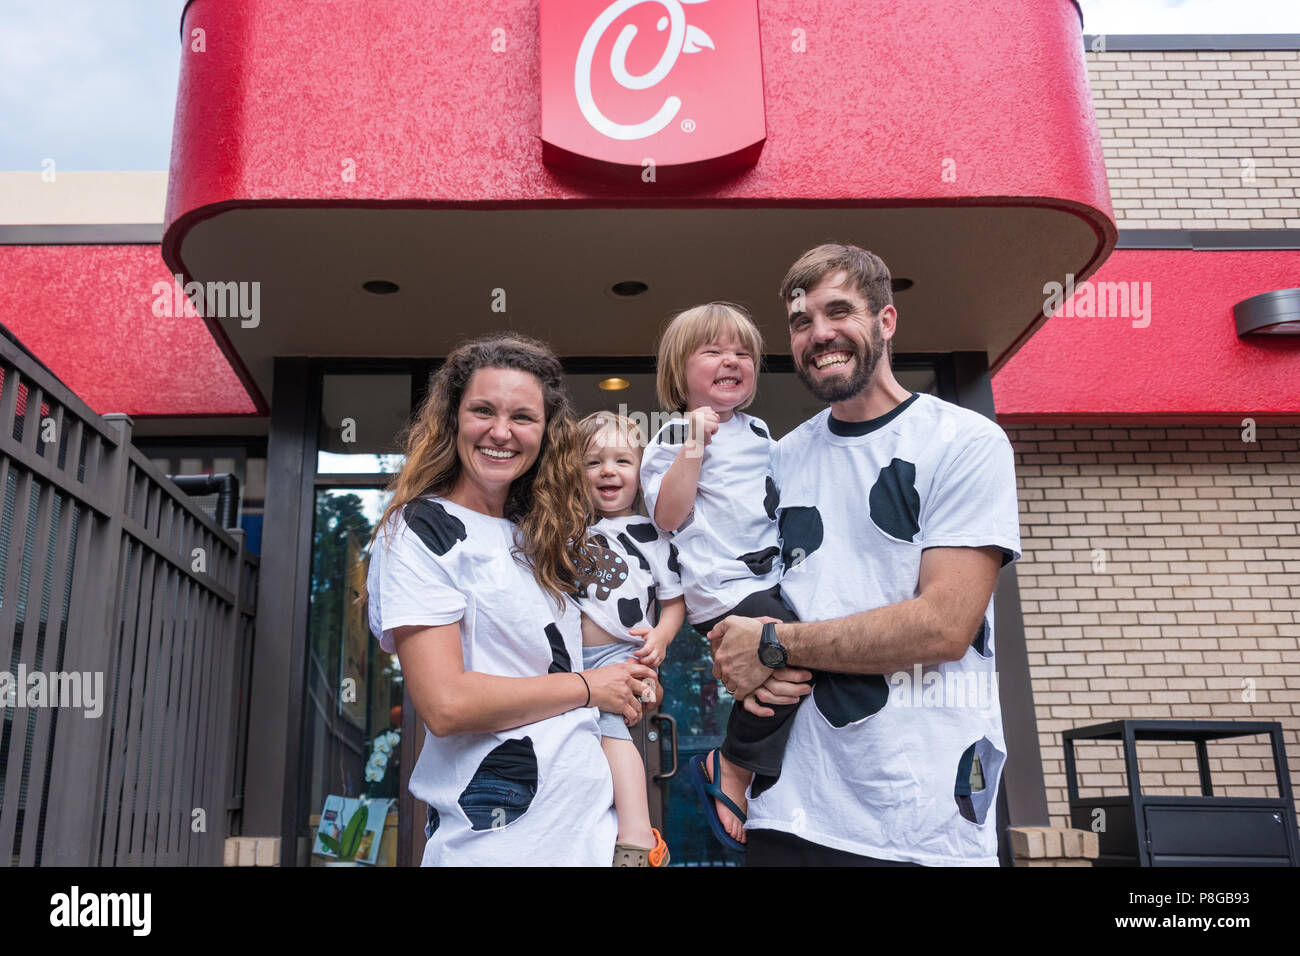 A happy family with their homemade cow outfits for Cow Appreciation Day at Chick-fil-A, America's top-rated quick service restaurant. (USA) Stock Photo